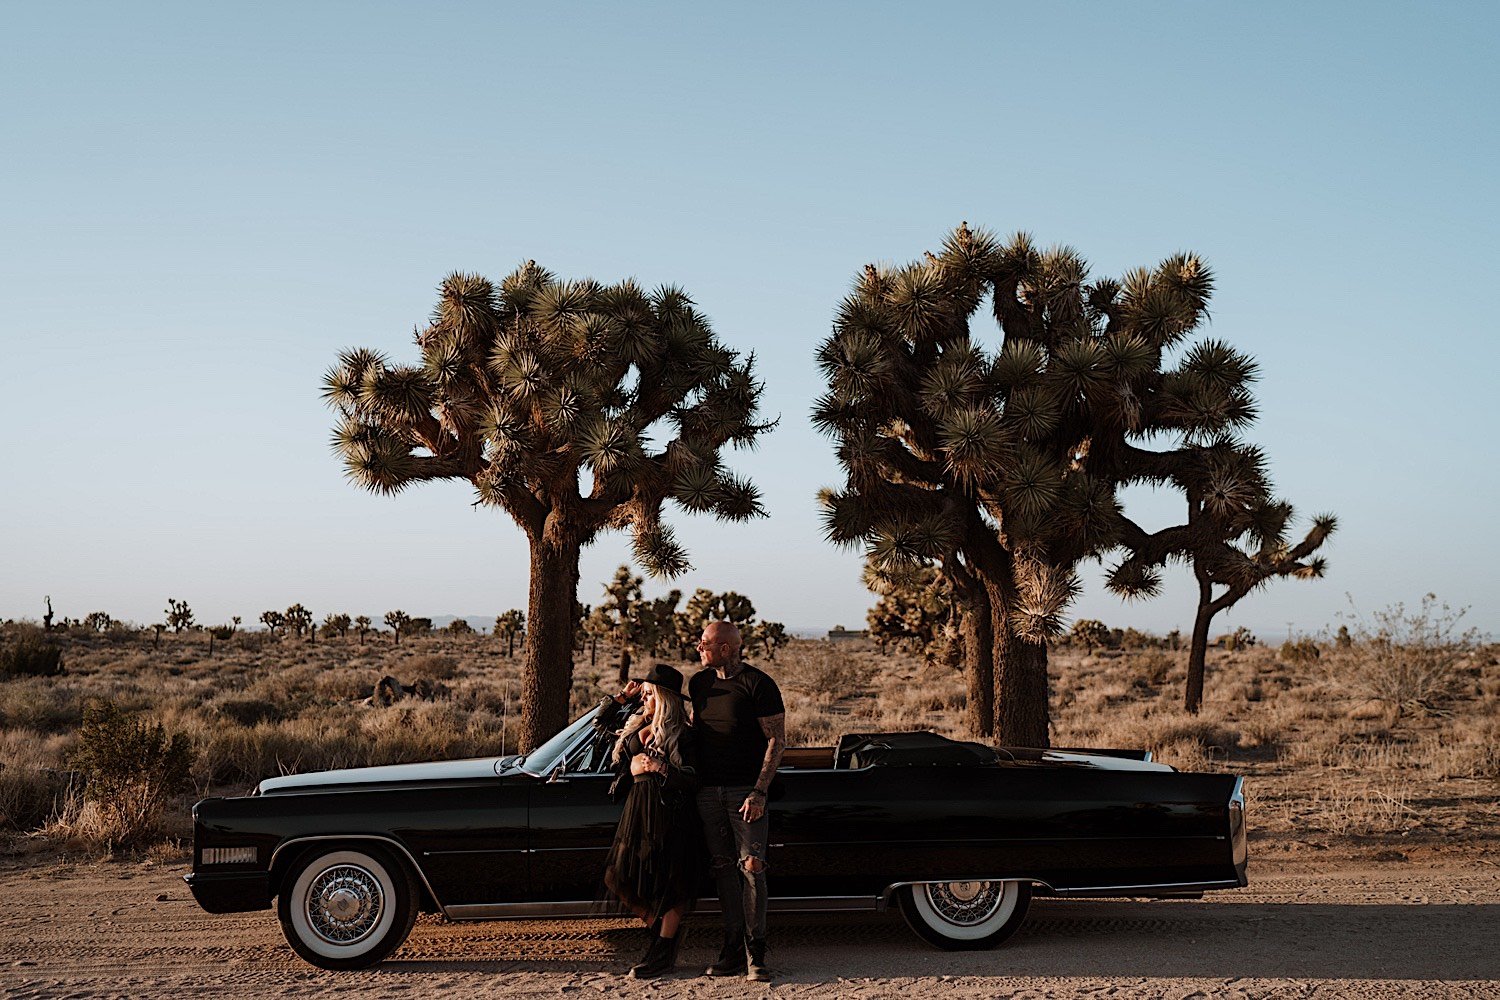 Couple posed next to a classic car in the desert in front of Joshua trees